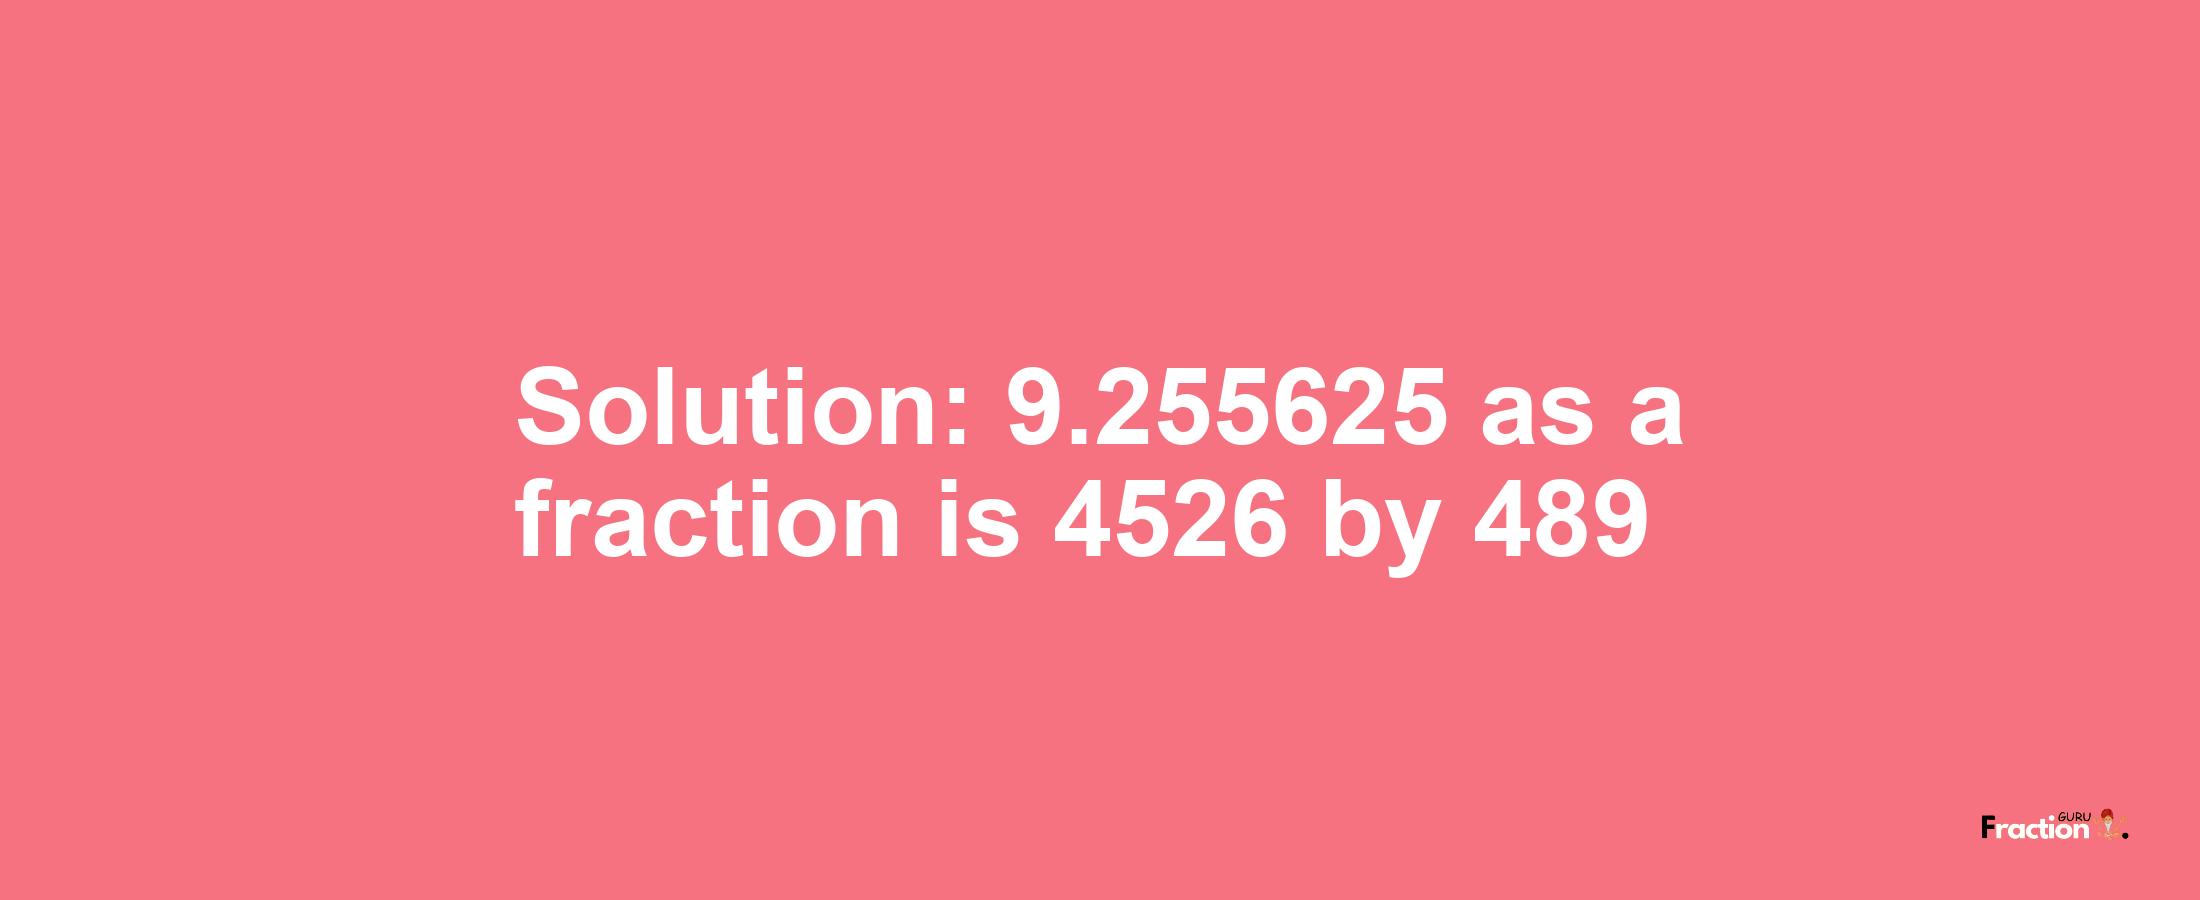 Solution:9.255625 as a fraction is 4526/489